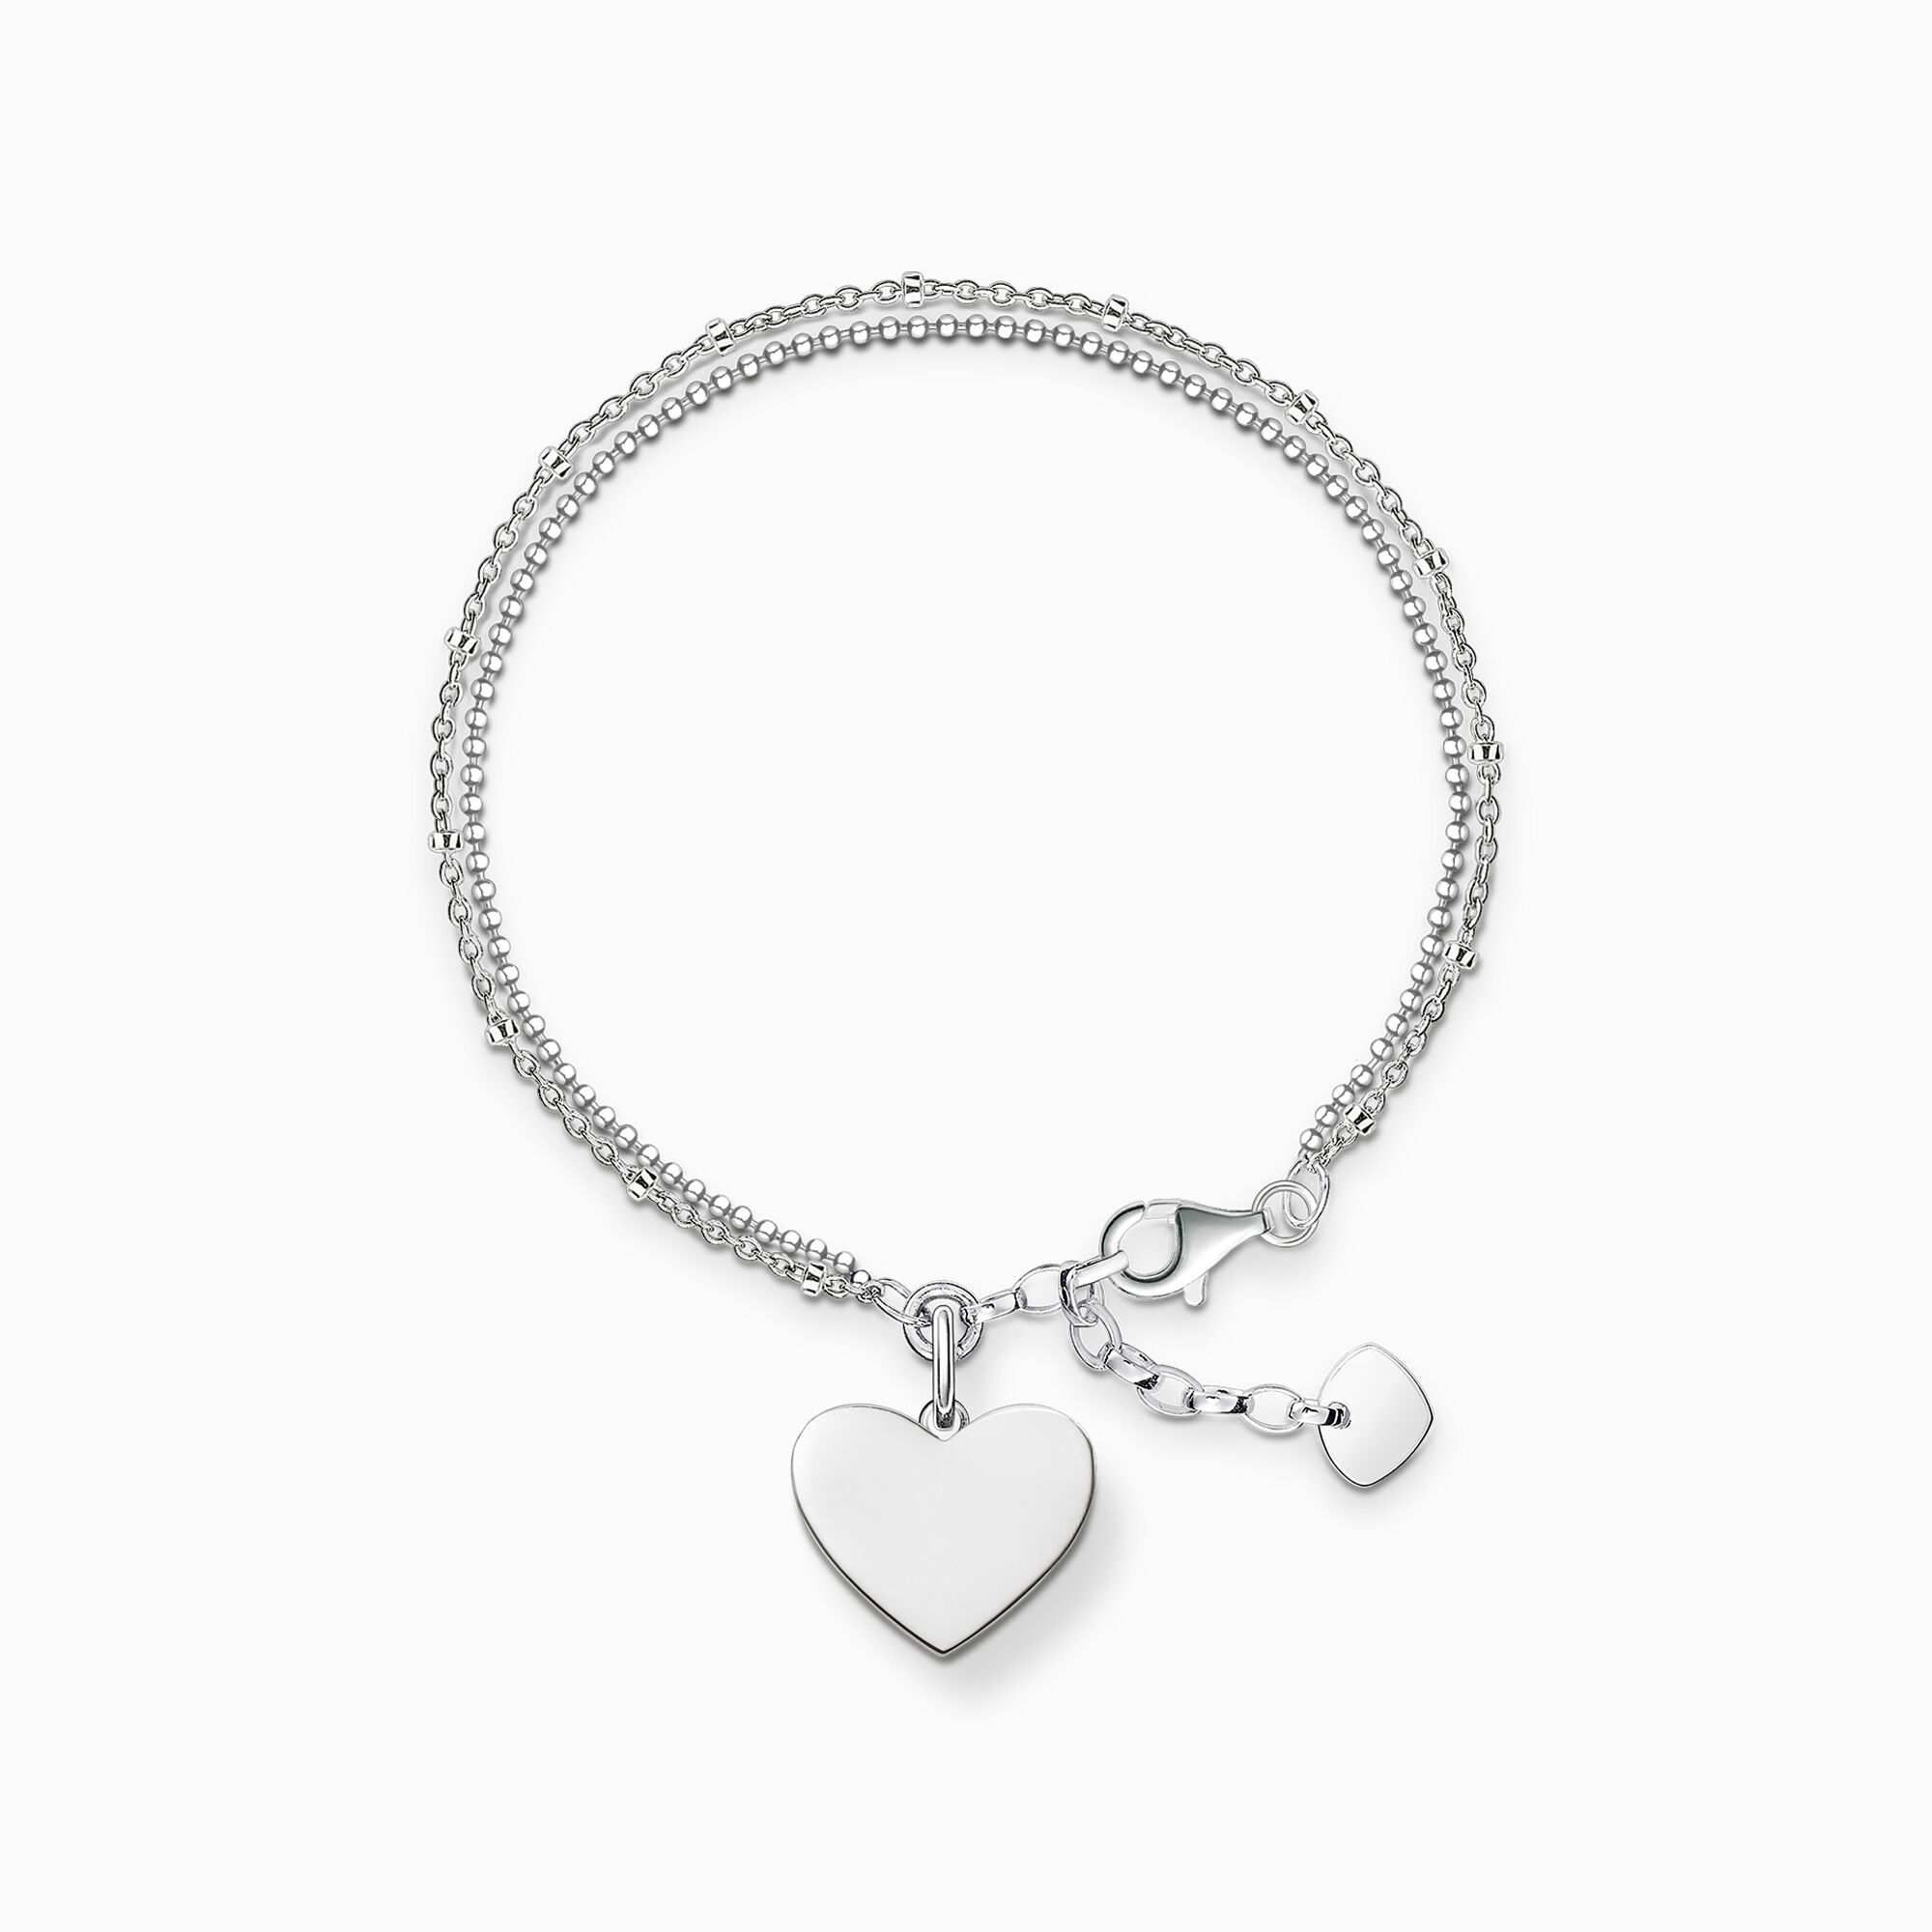 Bracelet heart silver from the  collection in the THOMAS SABO online store